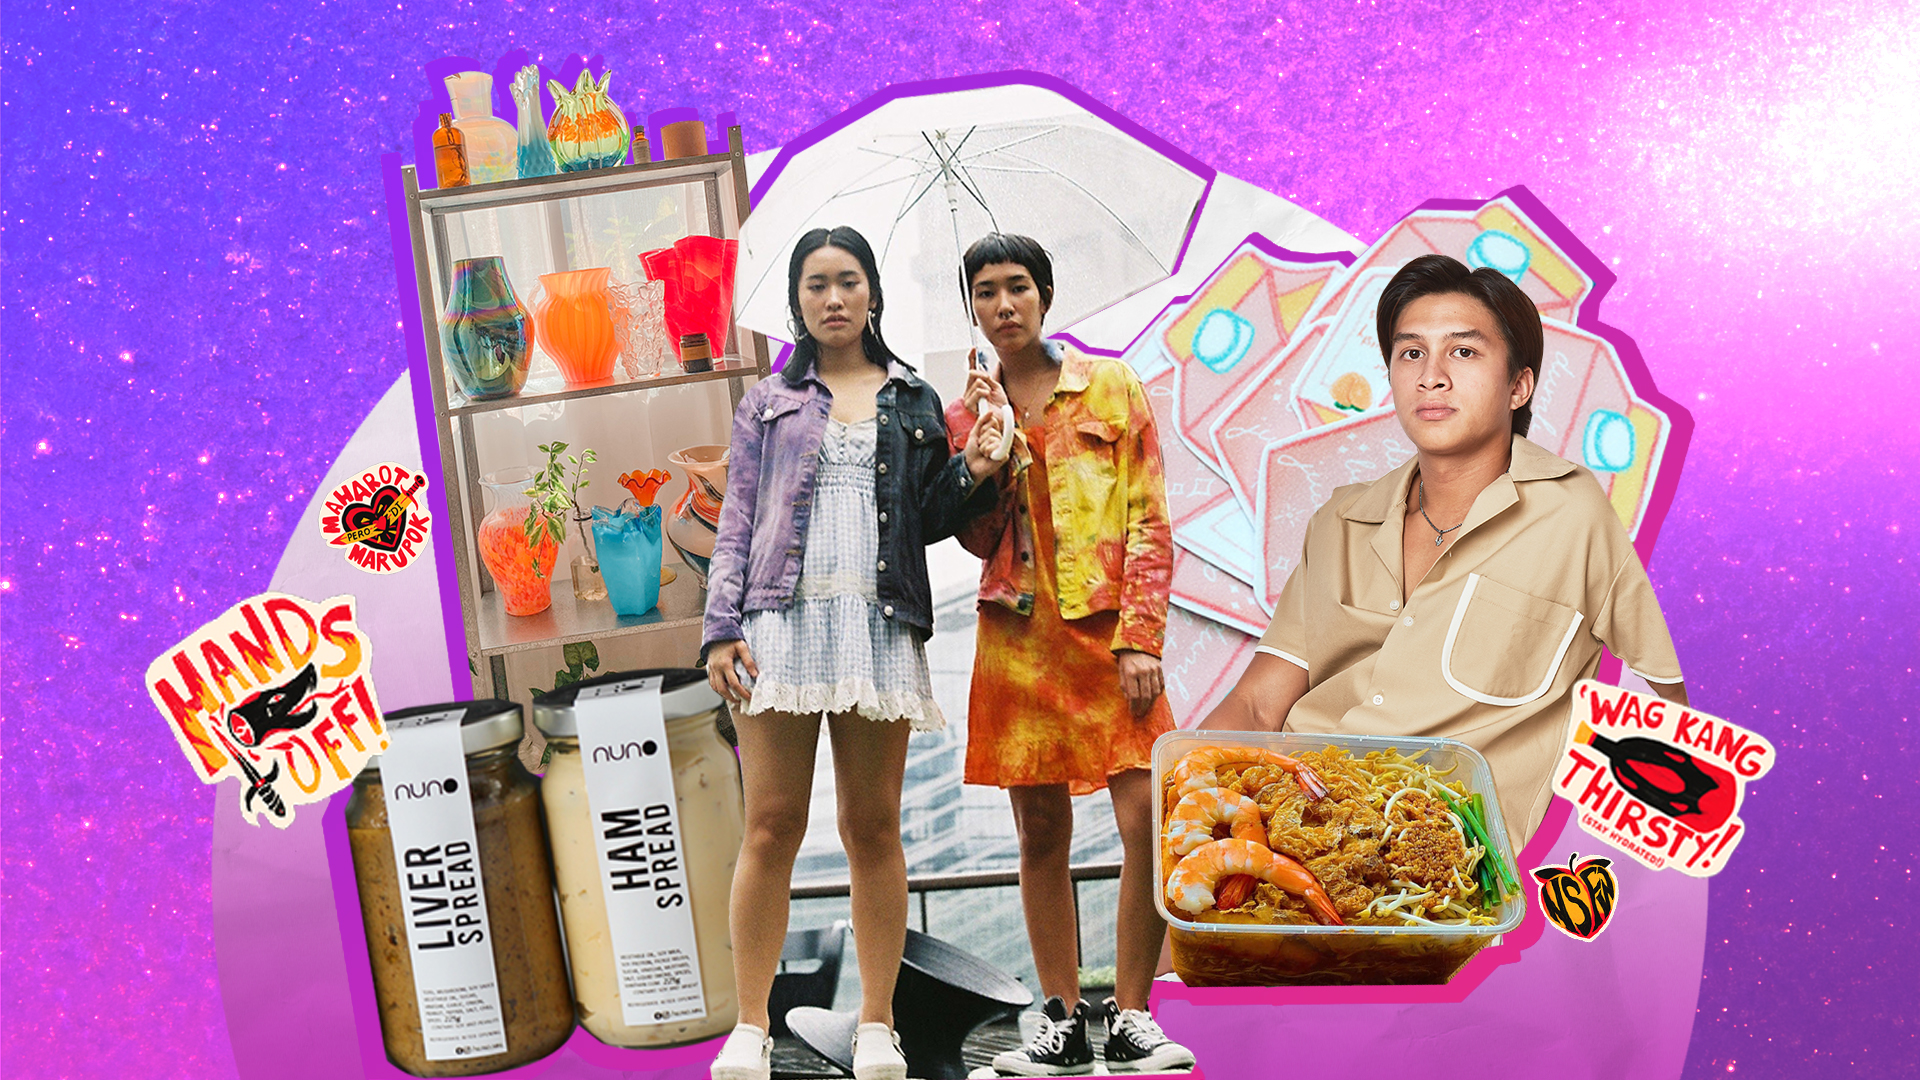 Queer owned businesses in the Philippines